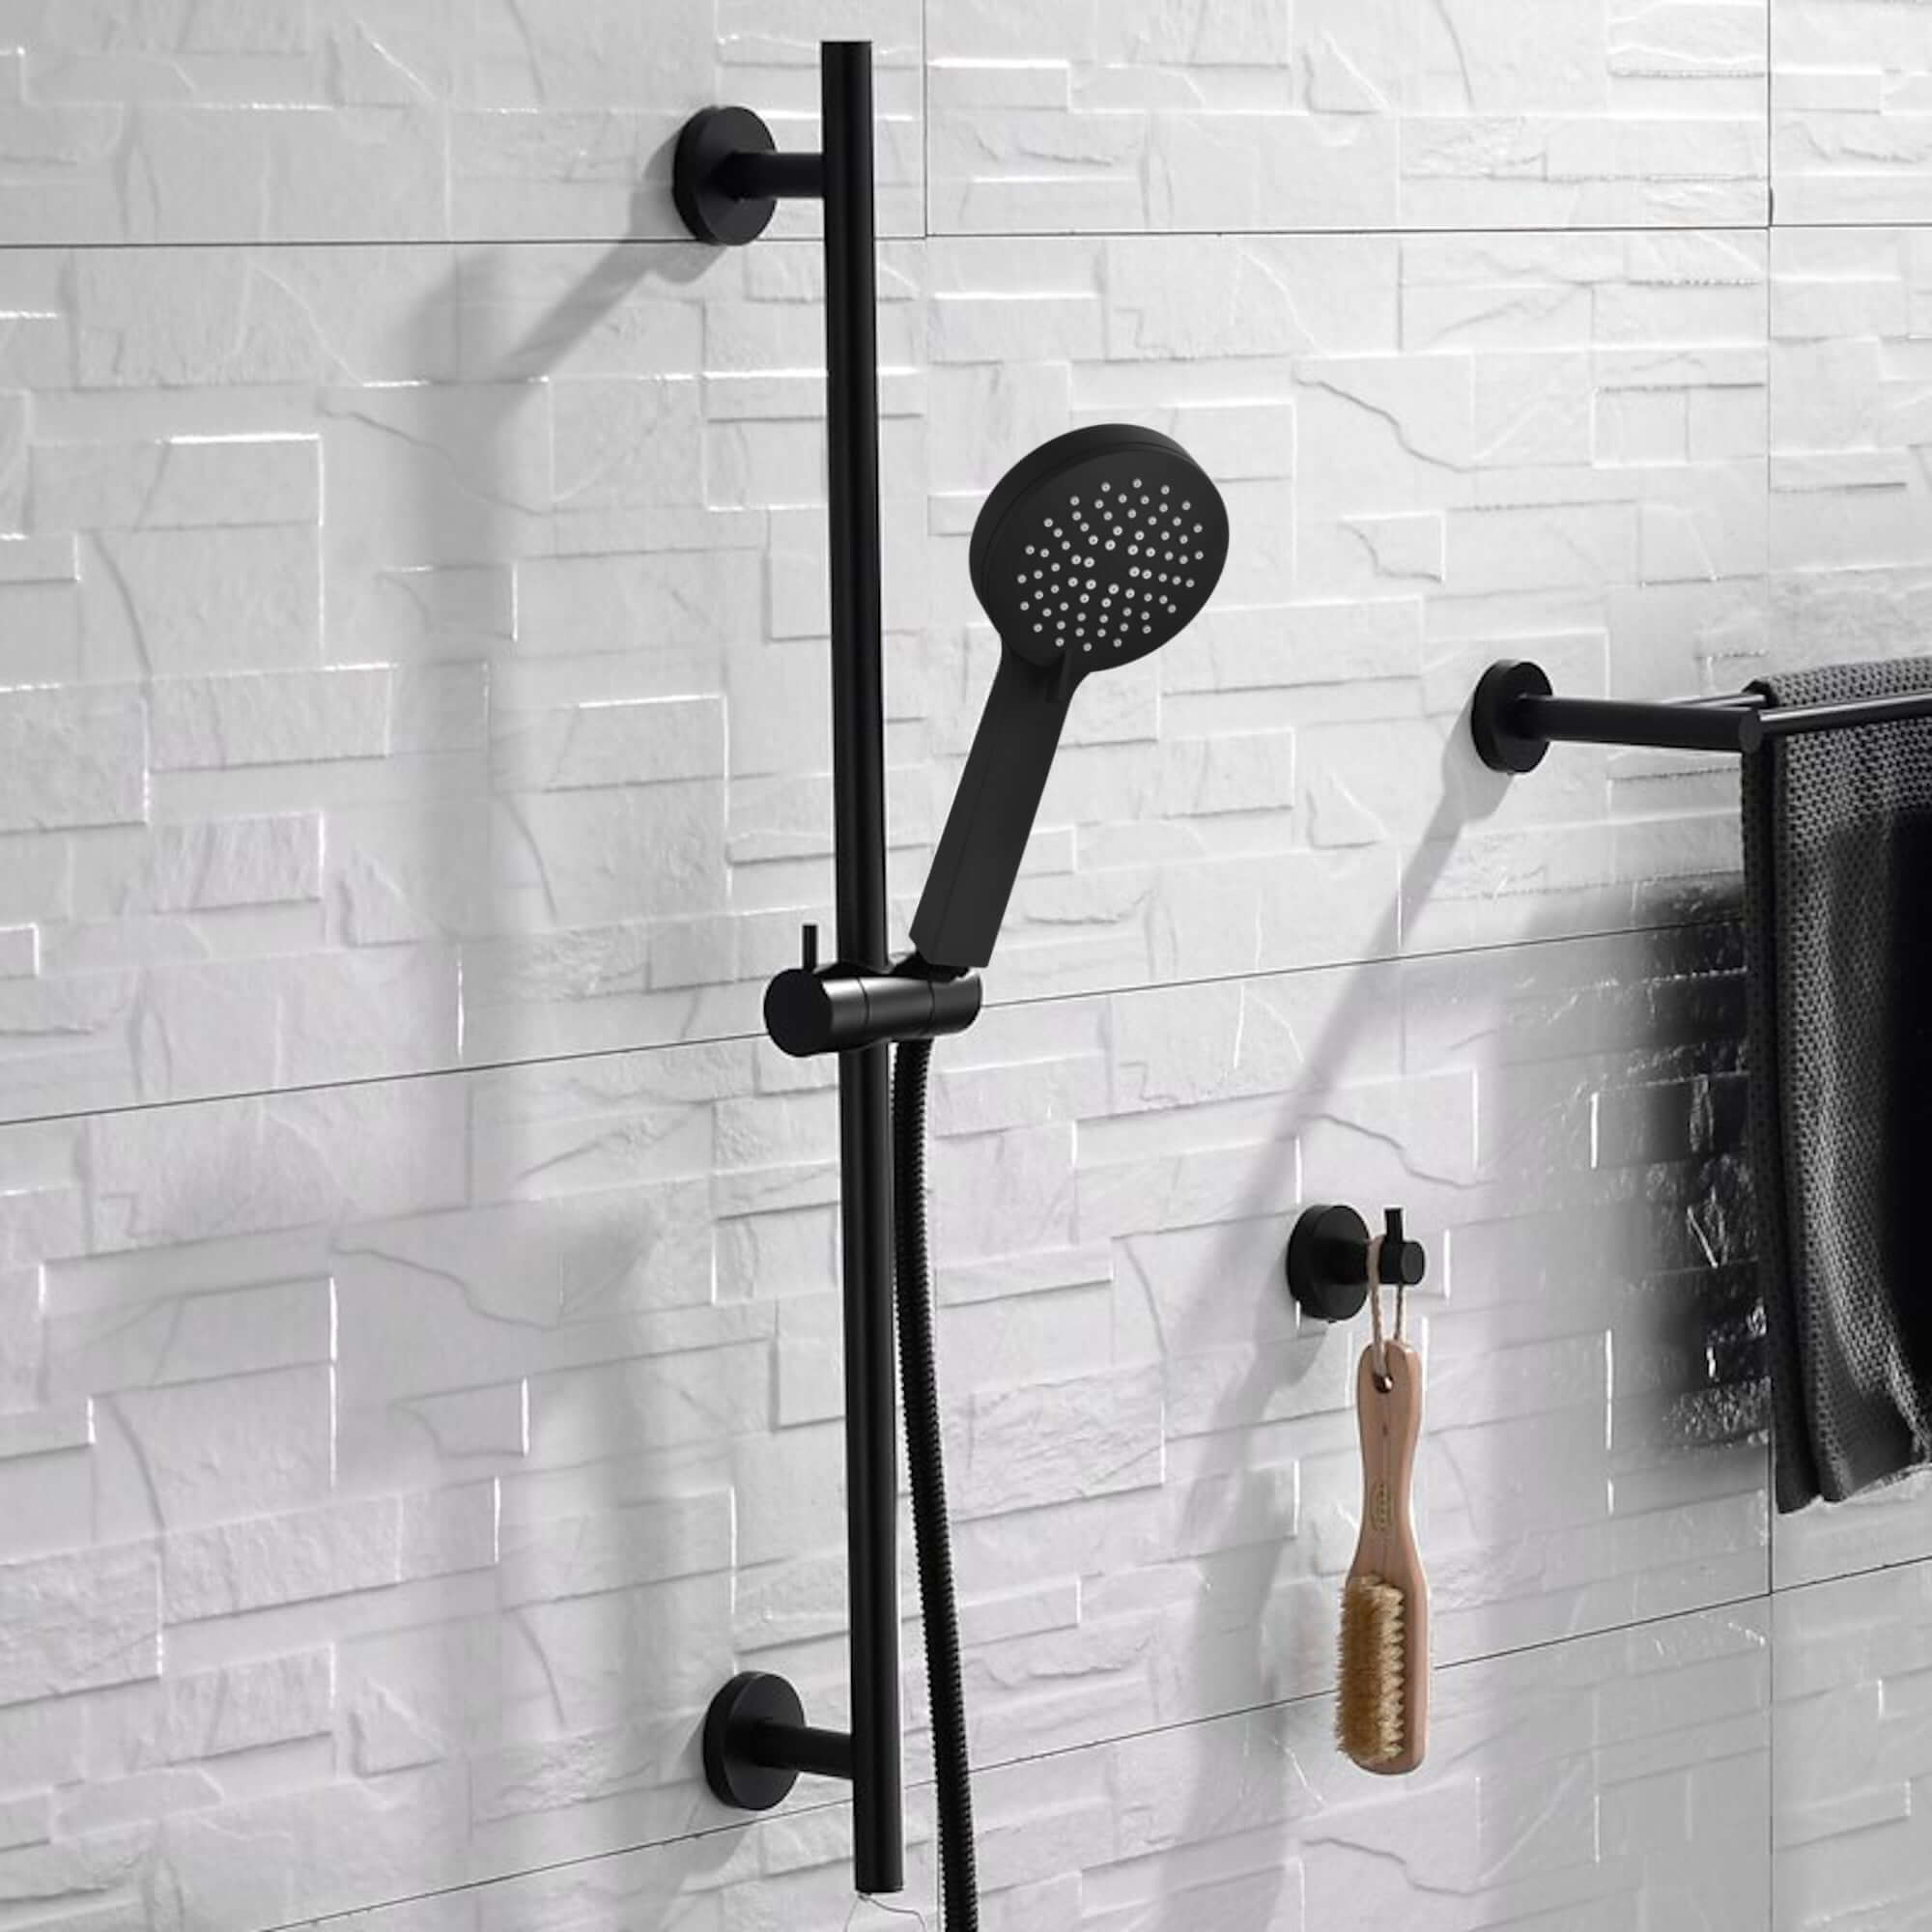 Contemporary Shower Slider Riser Rail Kit With 3 Function Shower Head, Hose and Wall Elbow - Matte Black